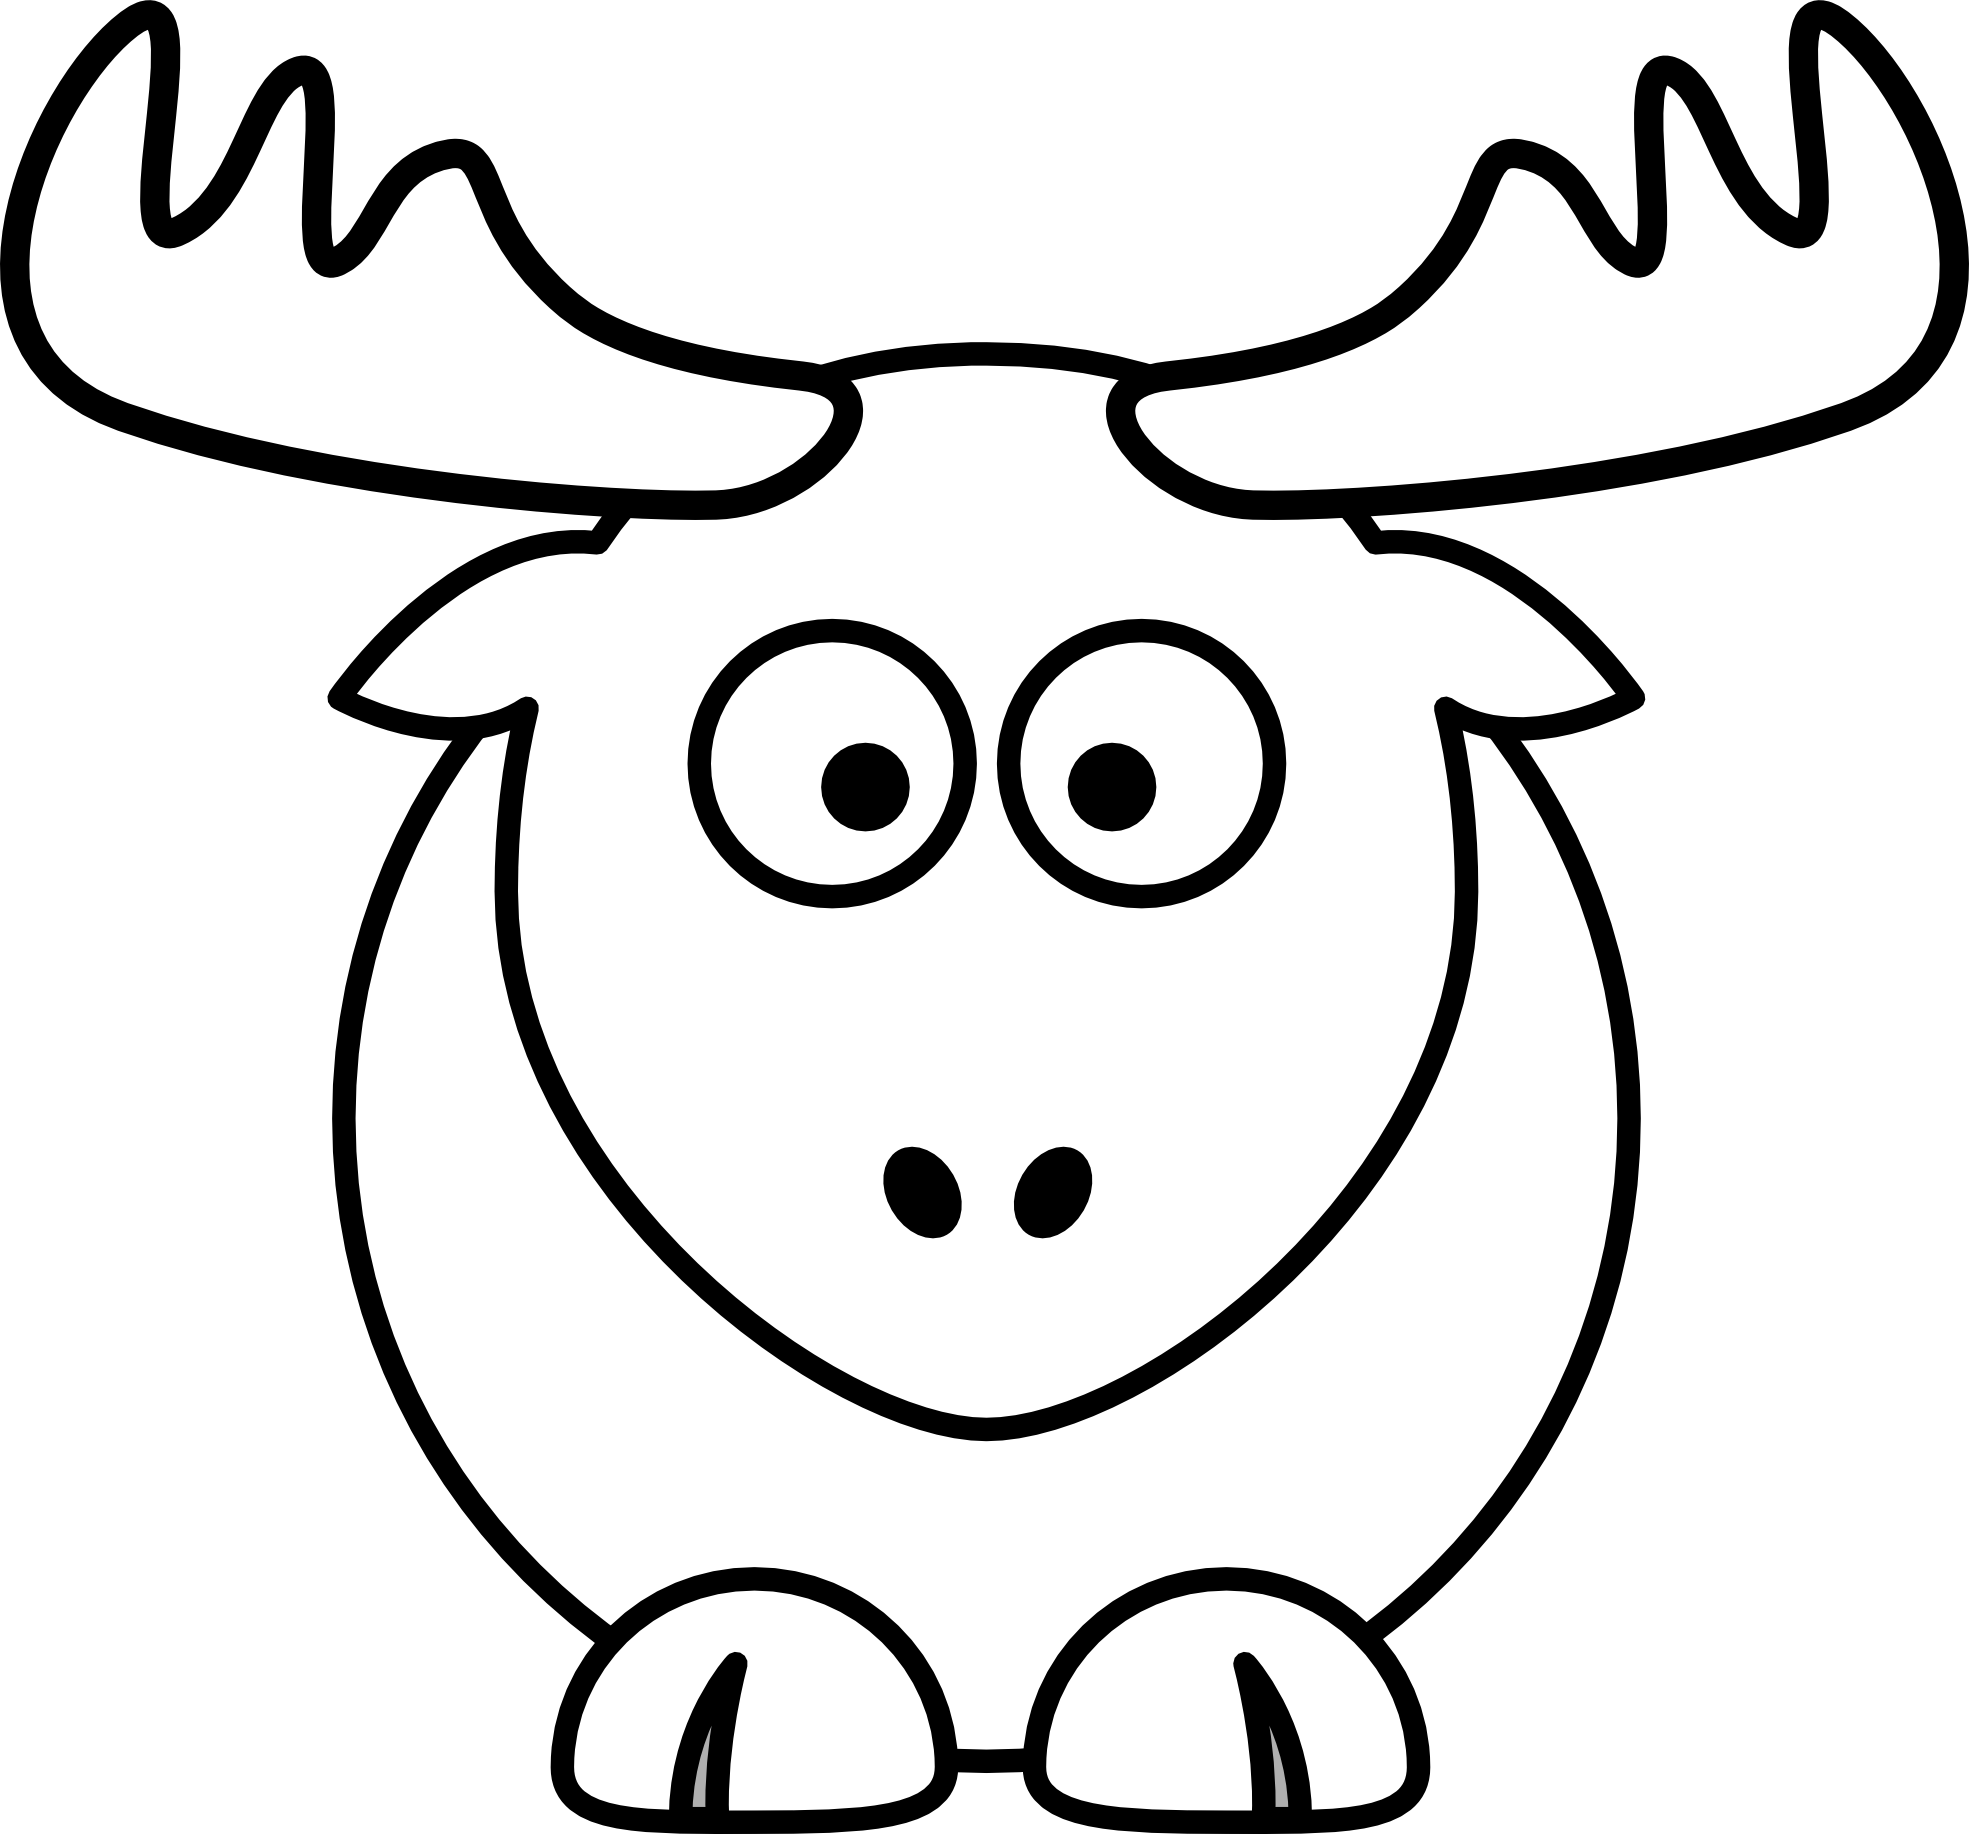 reindeer clipart black and wh - Reindeer Clipart Black And White